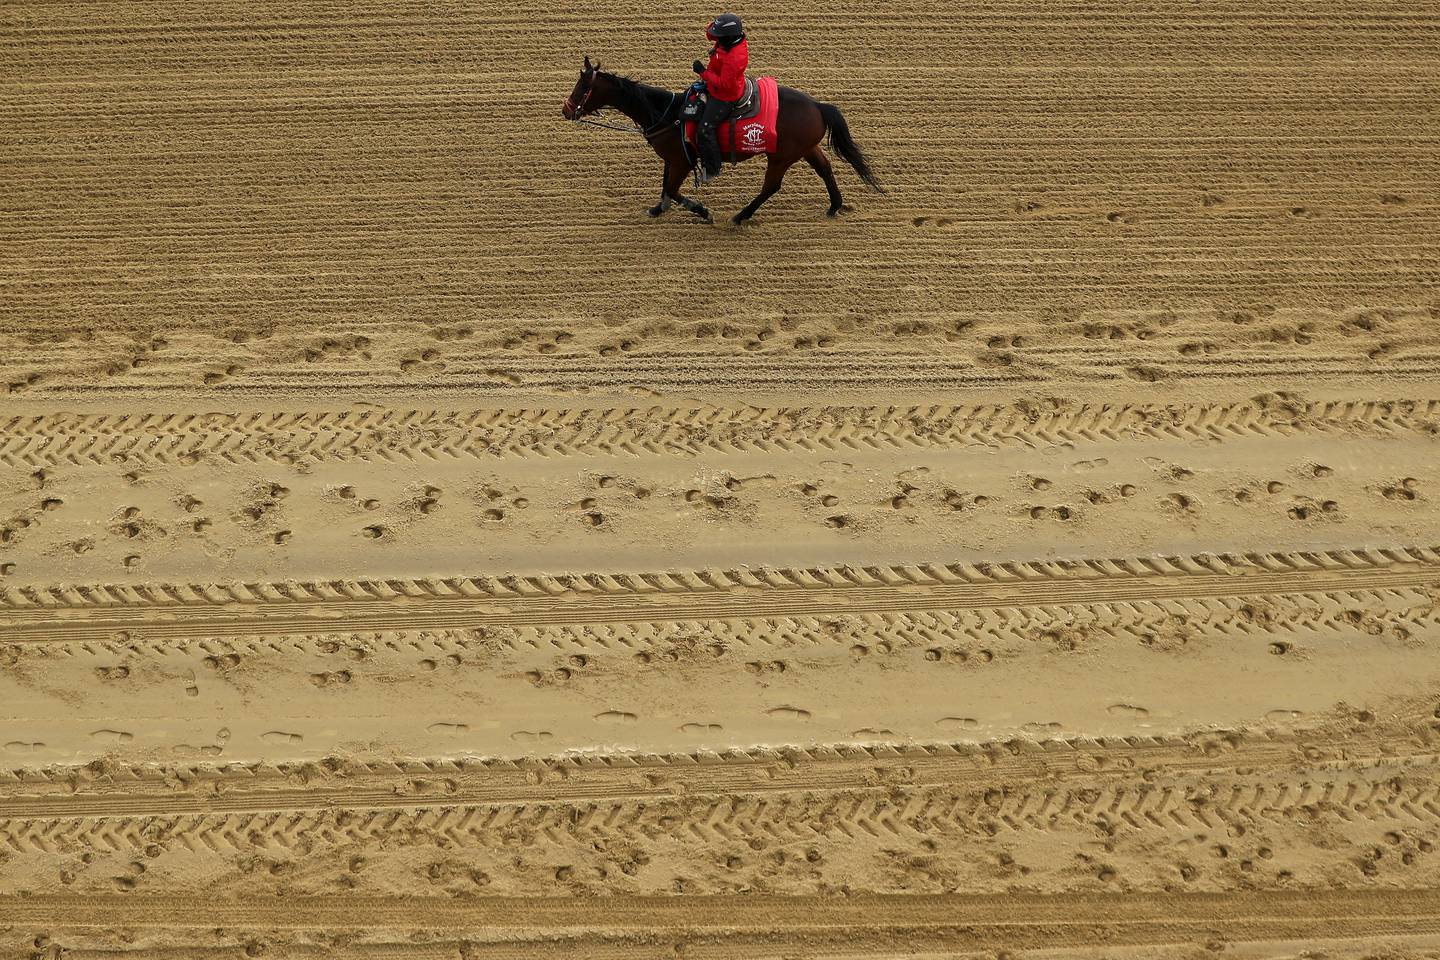 LAUREL, MARYLAND - MARCH 15: A outrider walks the track as horses and jockeys prepare to race without spectators at Laurel Park on March 15, 2020 in Laurel, Maryland. Nearly all of professional sports have been canceled or postposed because of the Coronavirus pandemic, except for horse racing. However, today Maryland Gov. Larry Hogan issued an emergency order to close all Maryland casinos, racetracks, and simulcast betting facilities to the general public due to COVID-19.